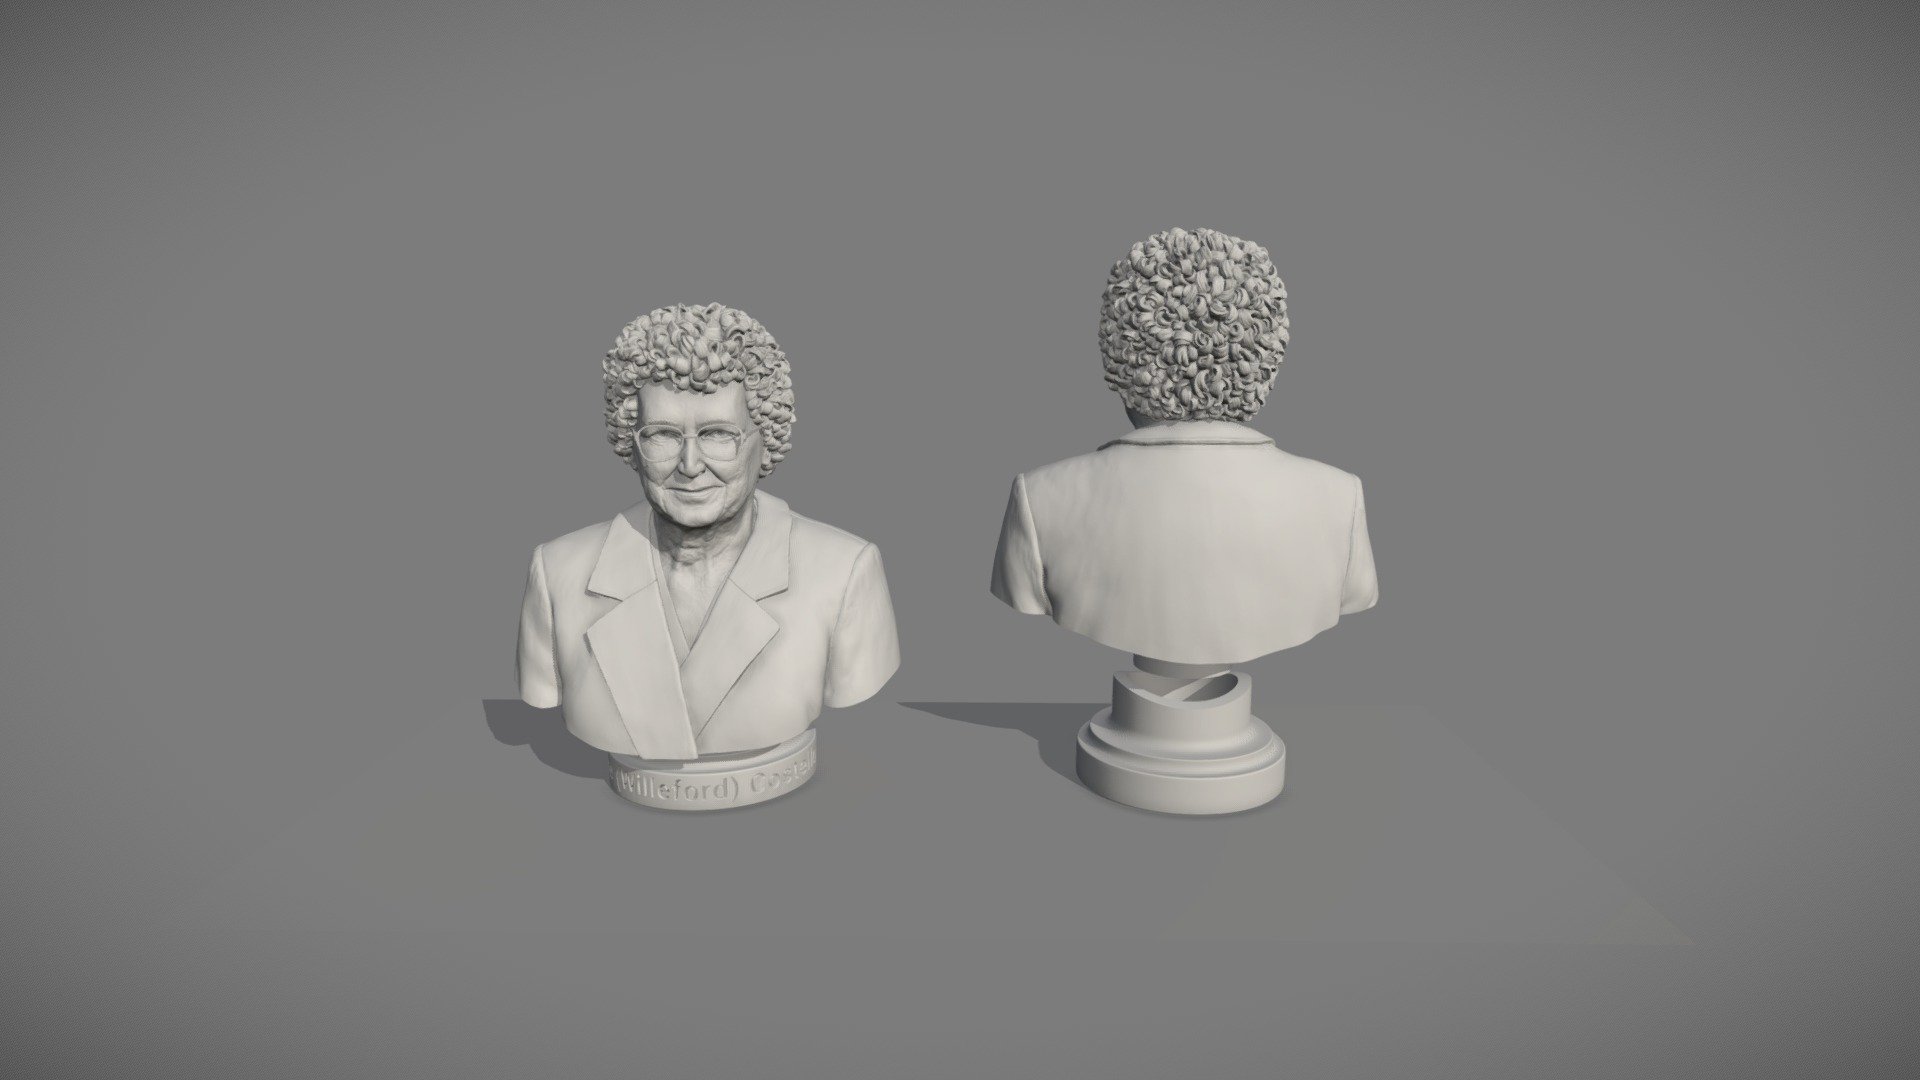 Final Set of Three Busts - Bust Number 2